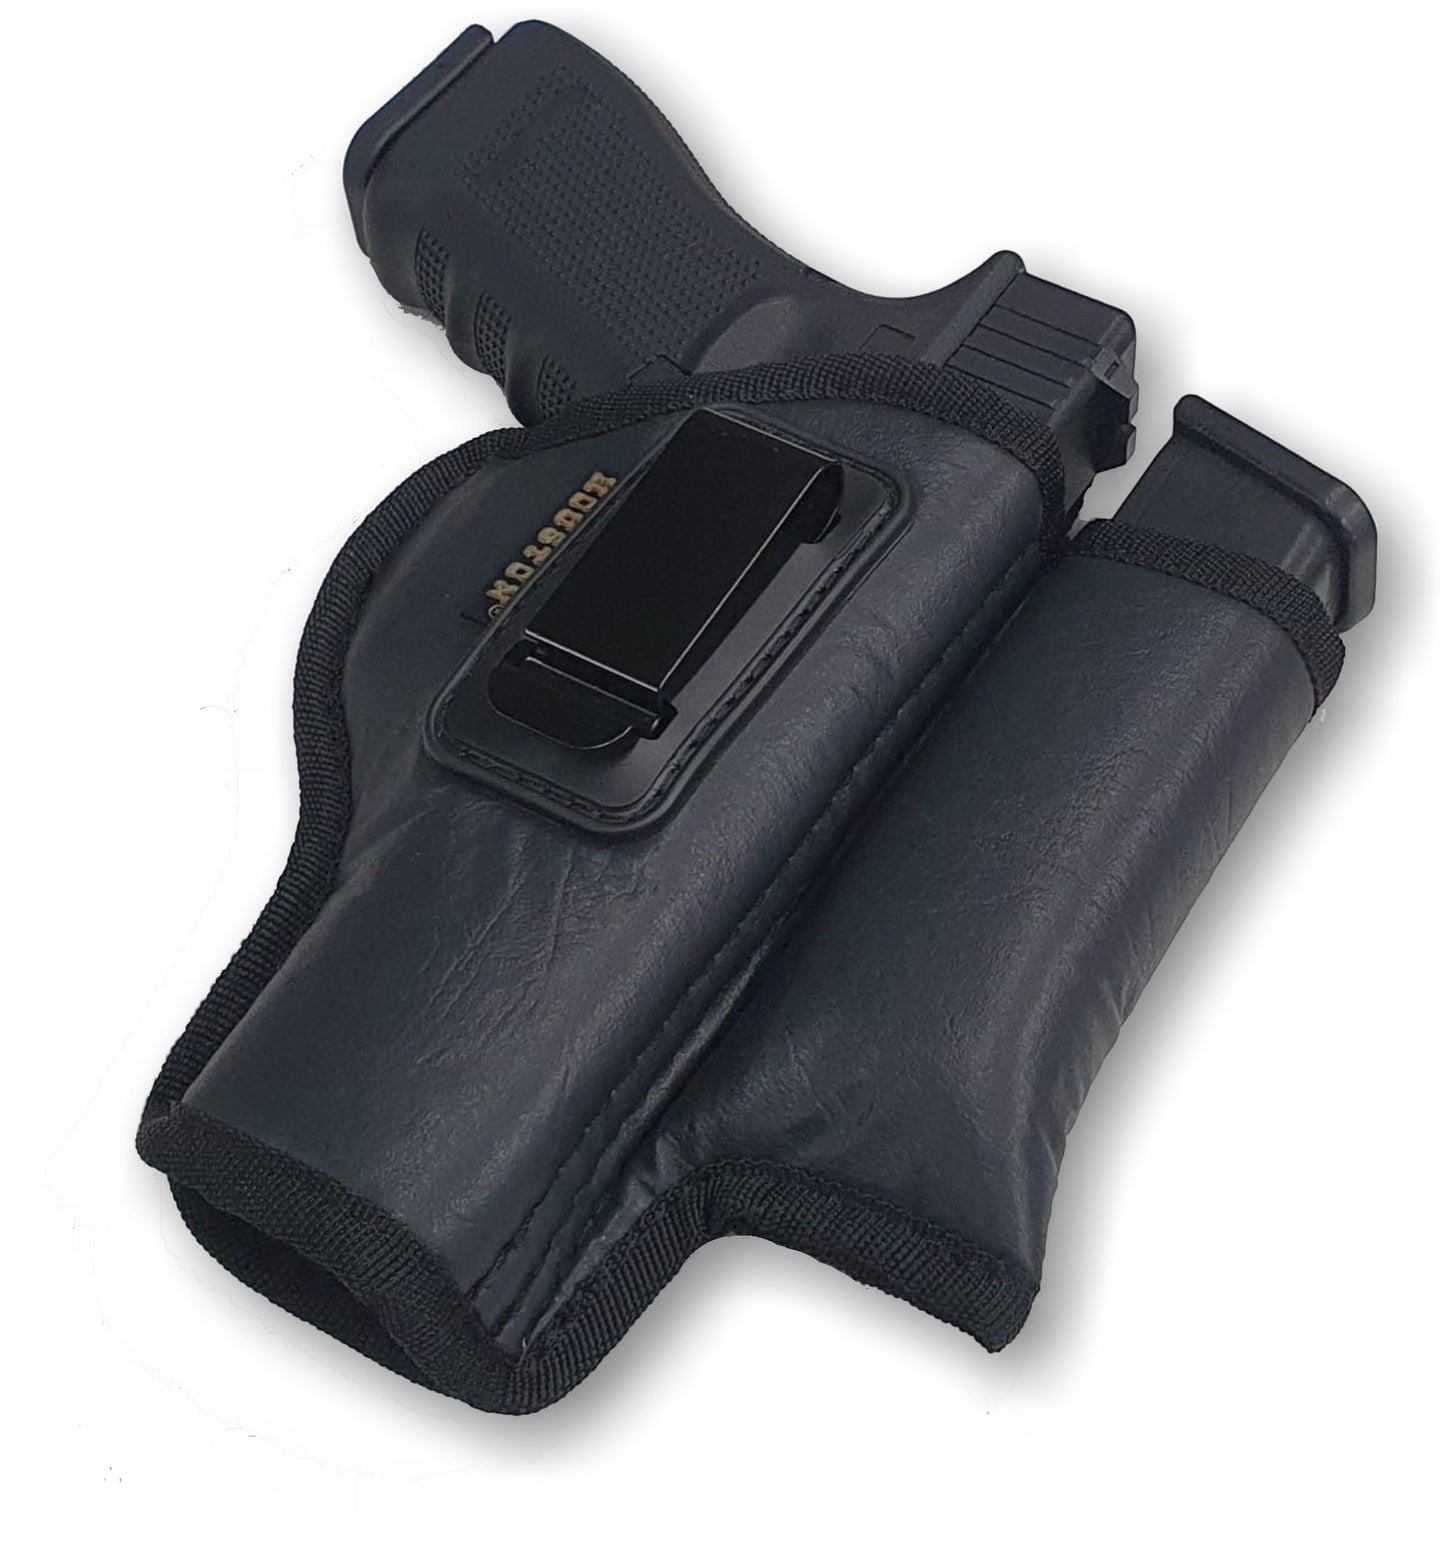 ECO - LEATHER Holster IWB with Mag Holder